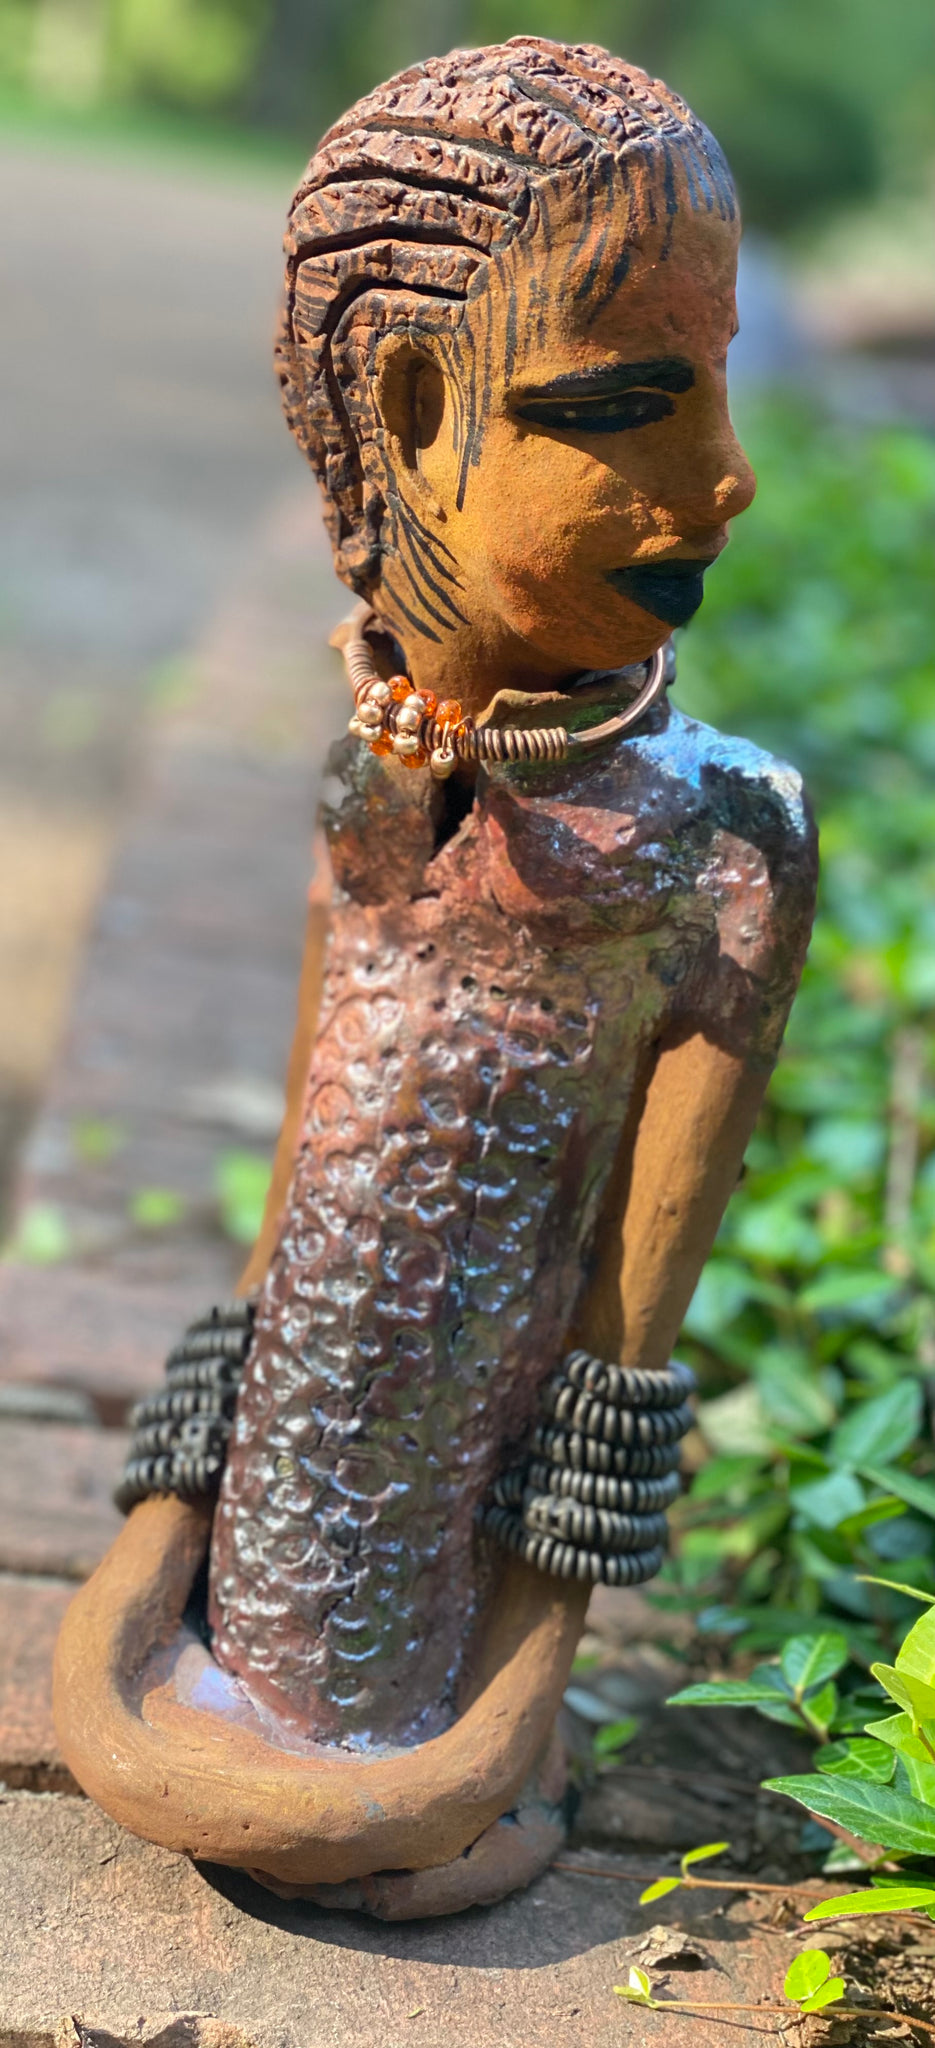 Jessie says no to wire hair and yes to the braids. Jessie stands 12" x 5" x 4.5" and weighs 1.03 lbs. She has a lovely honey brown complexion.  Jessie long loving arms rest beside her alligator copper green dress. She wears a strand of amber beads with spiral copper that can be worn as a bracelet. Jessie is a sophisticated lady that will grace your home.